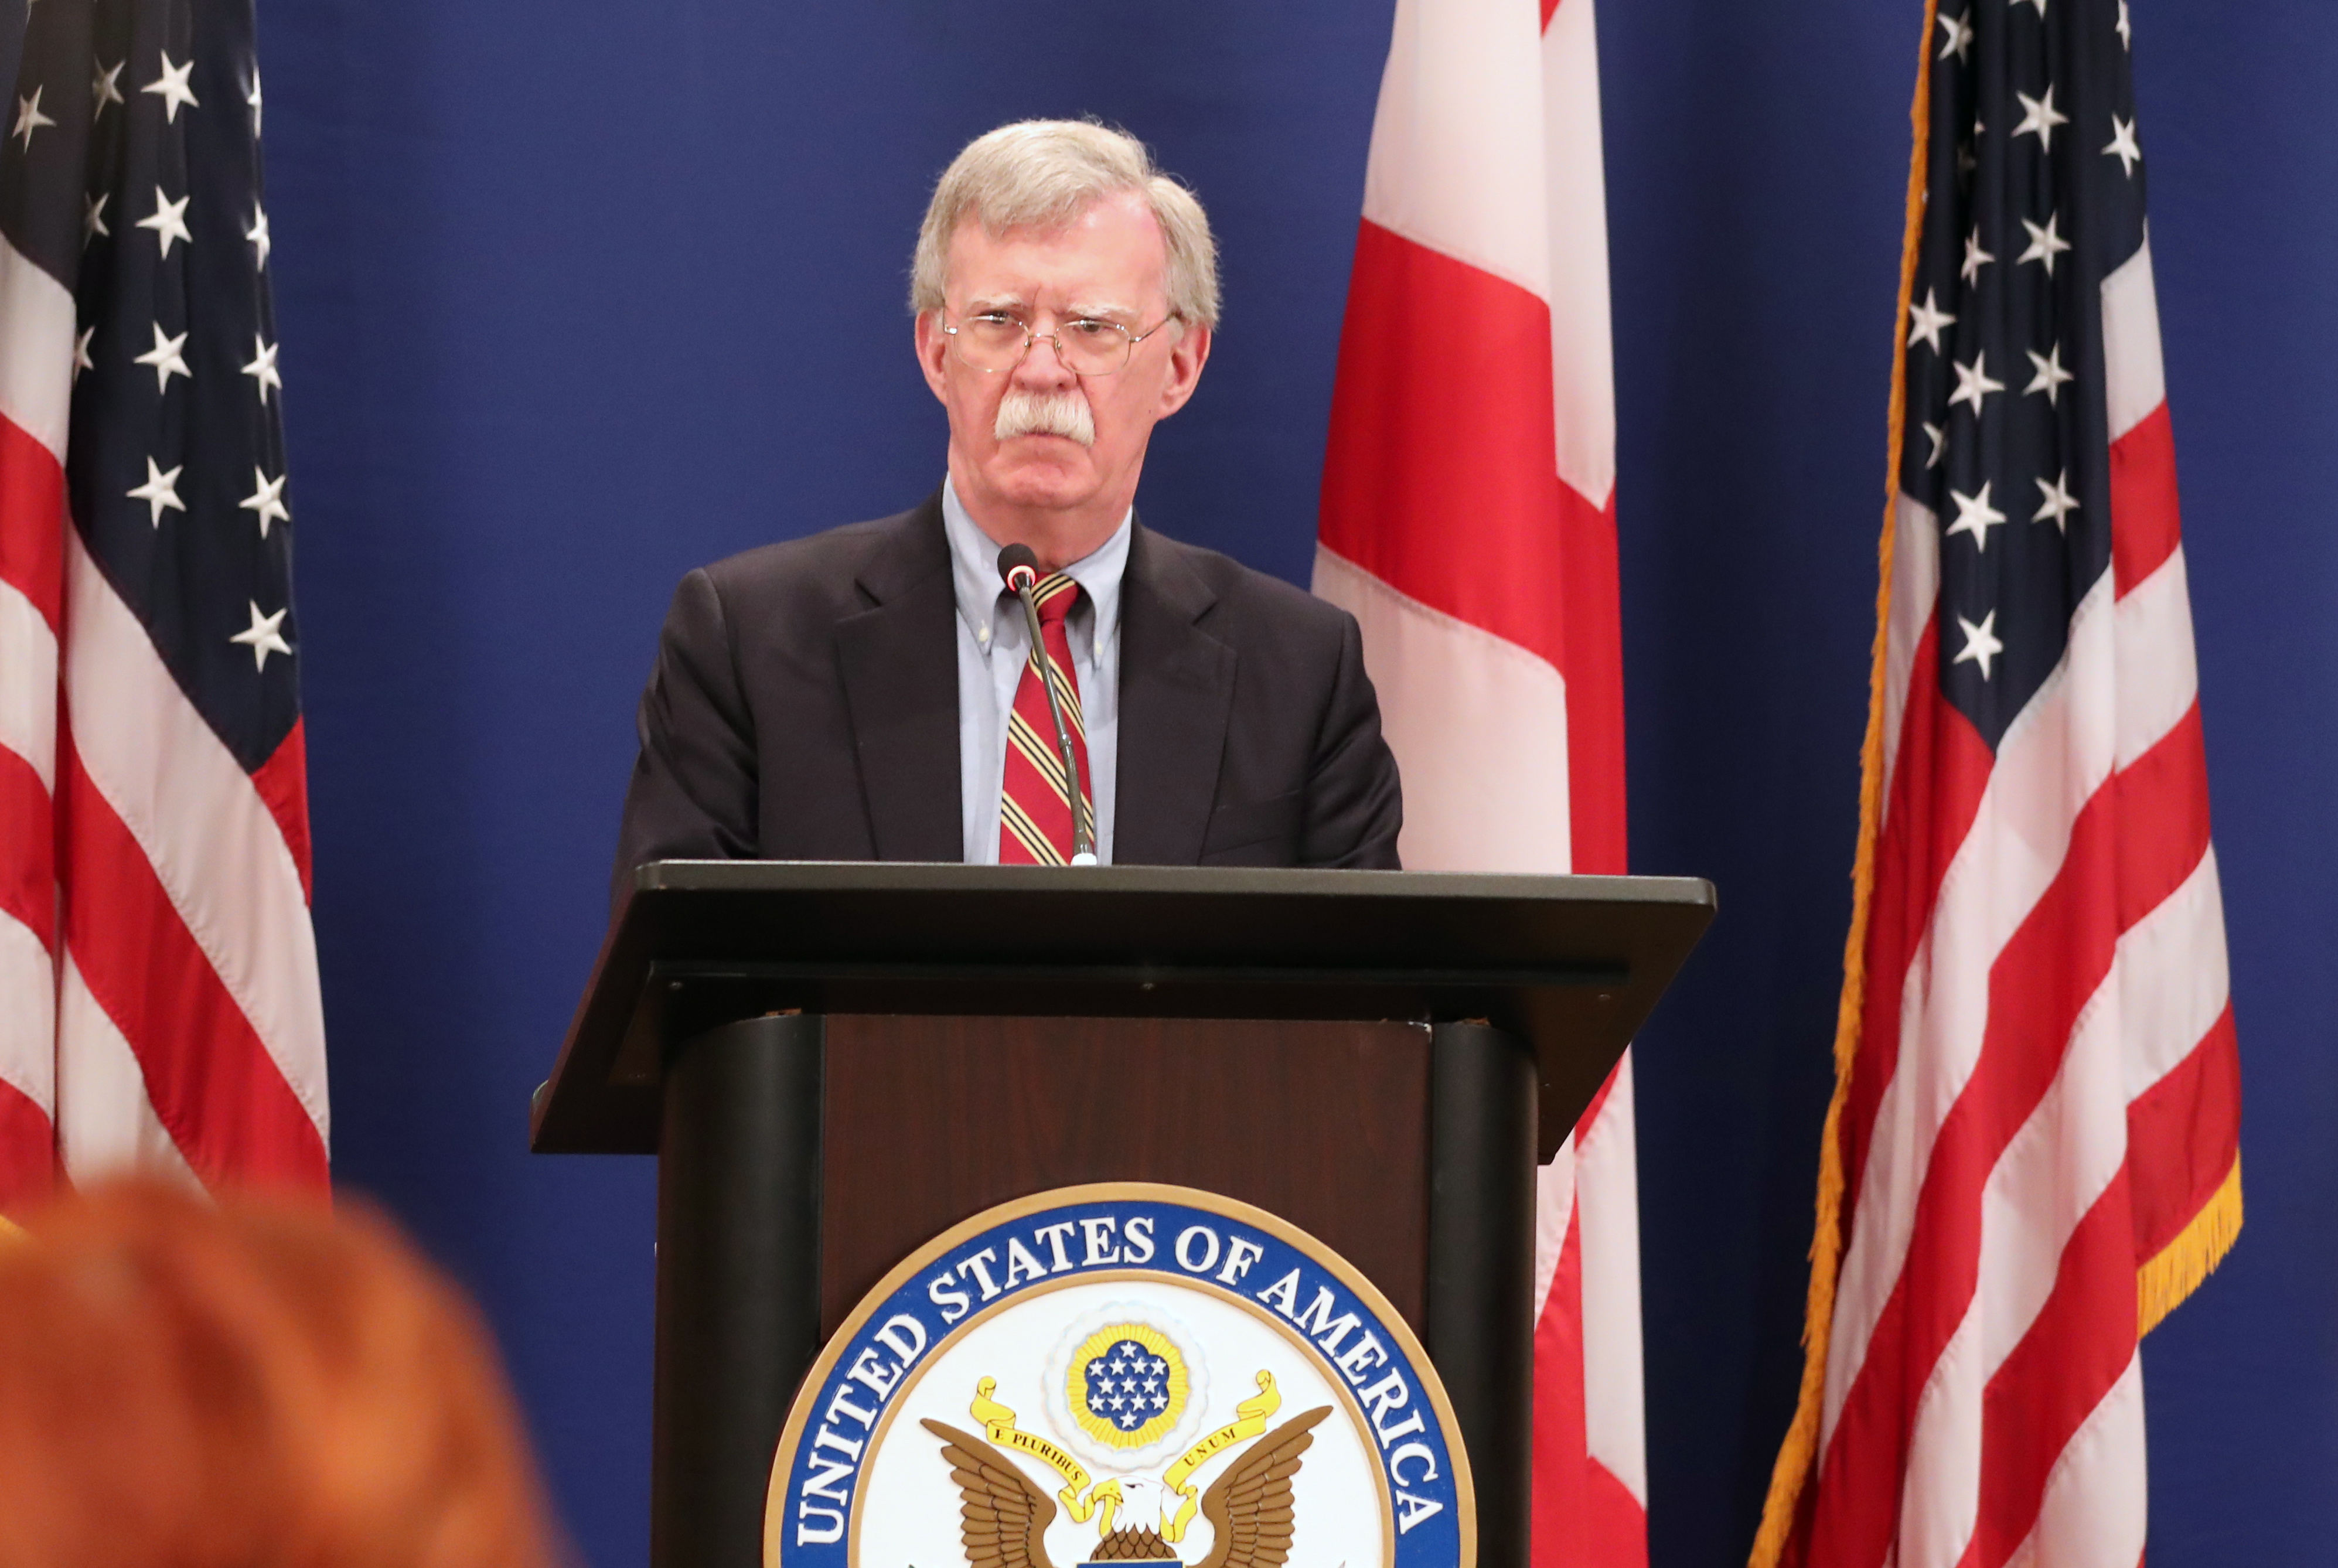 epa07121067 US National Security Adviser John Bolton  attends a briefing in Tbilisi, Georgia, 26 October 2018. The visit to Georgia is the last of Bolton's Caucasus trip with focus on regional security after his talks in Russia.  EPA/ZURAB KURTSIKIDZE